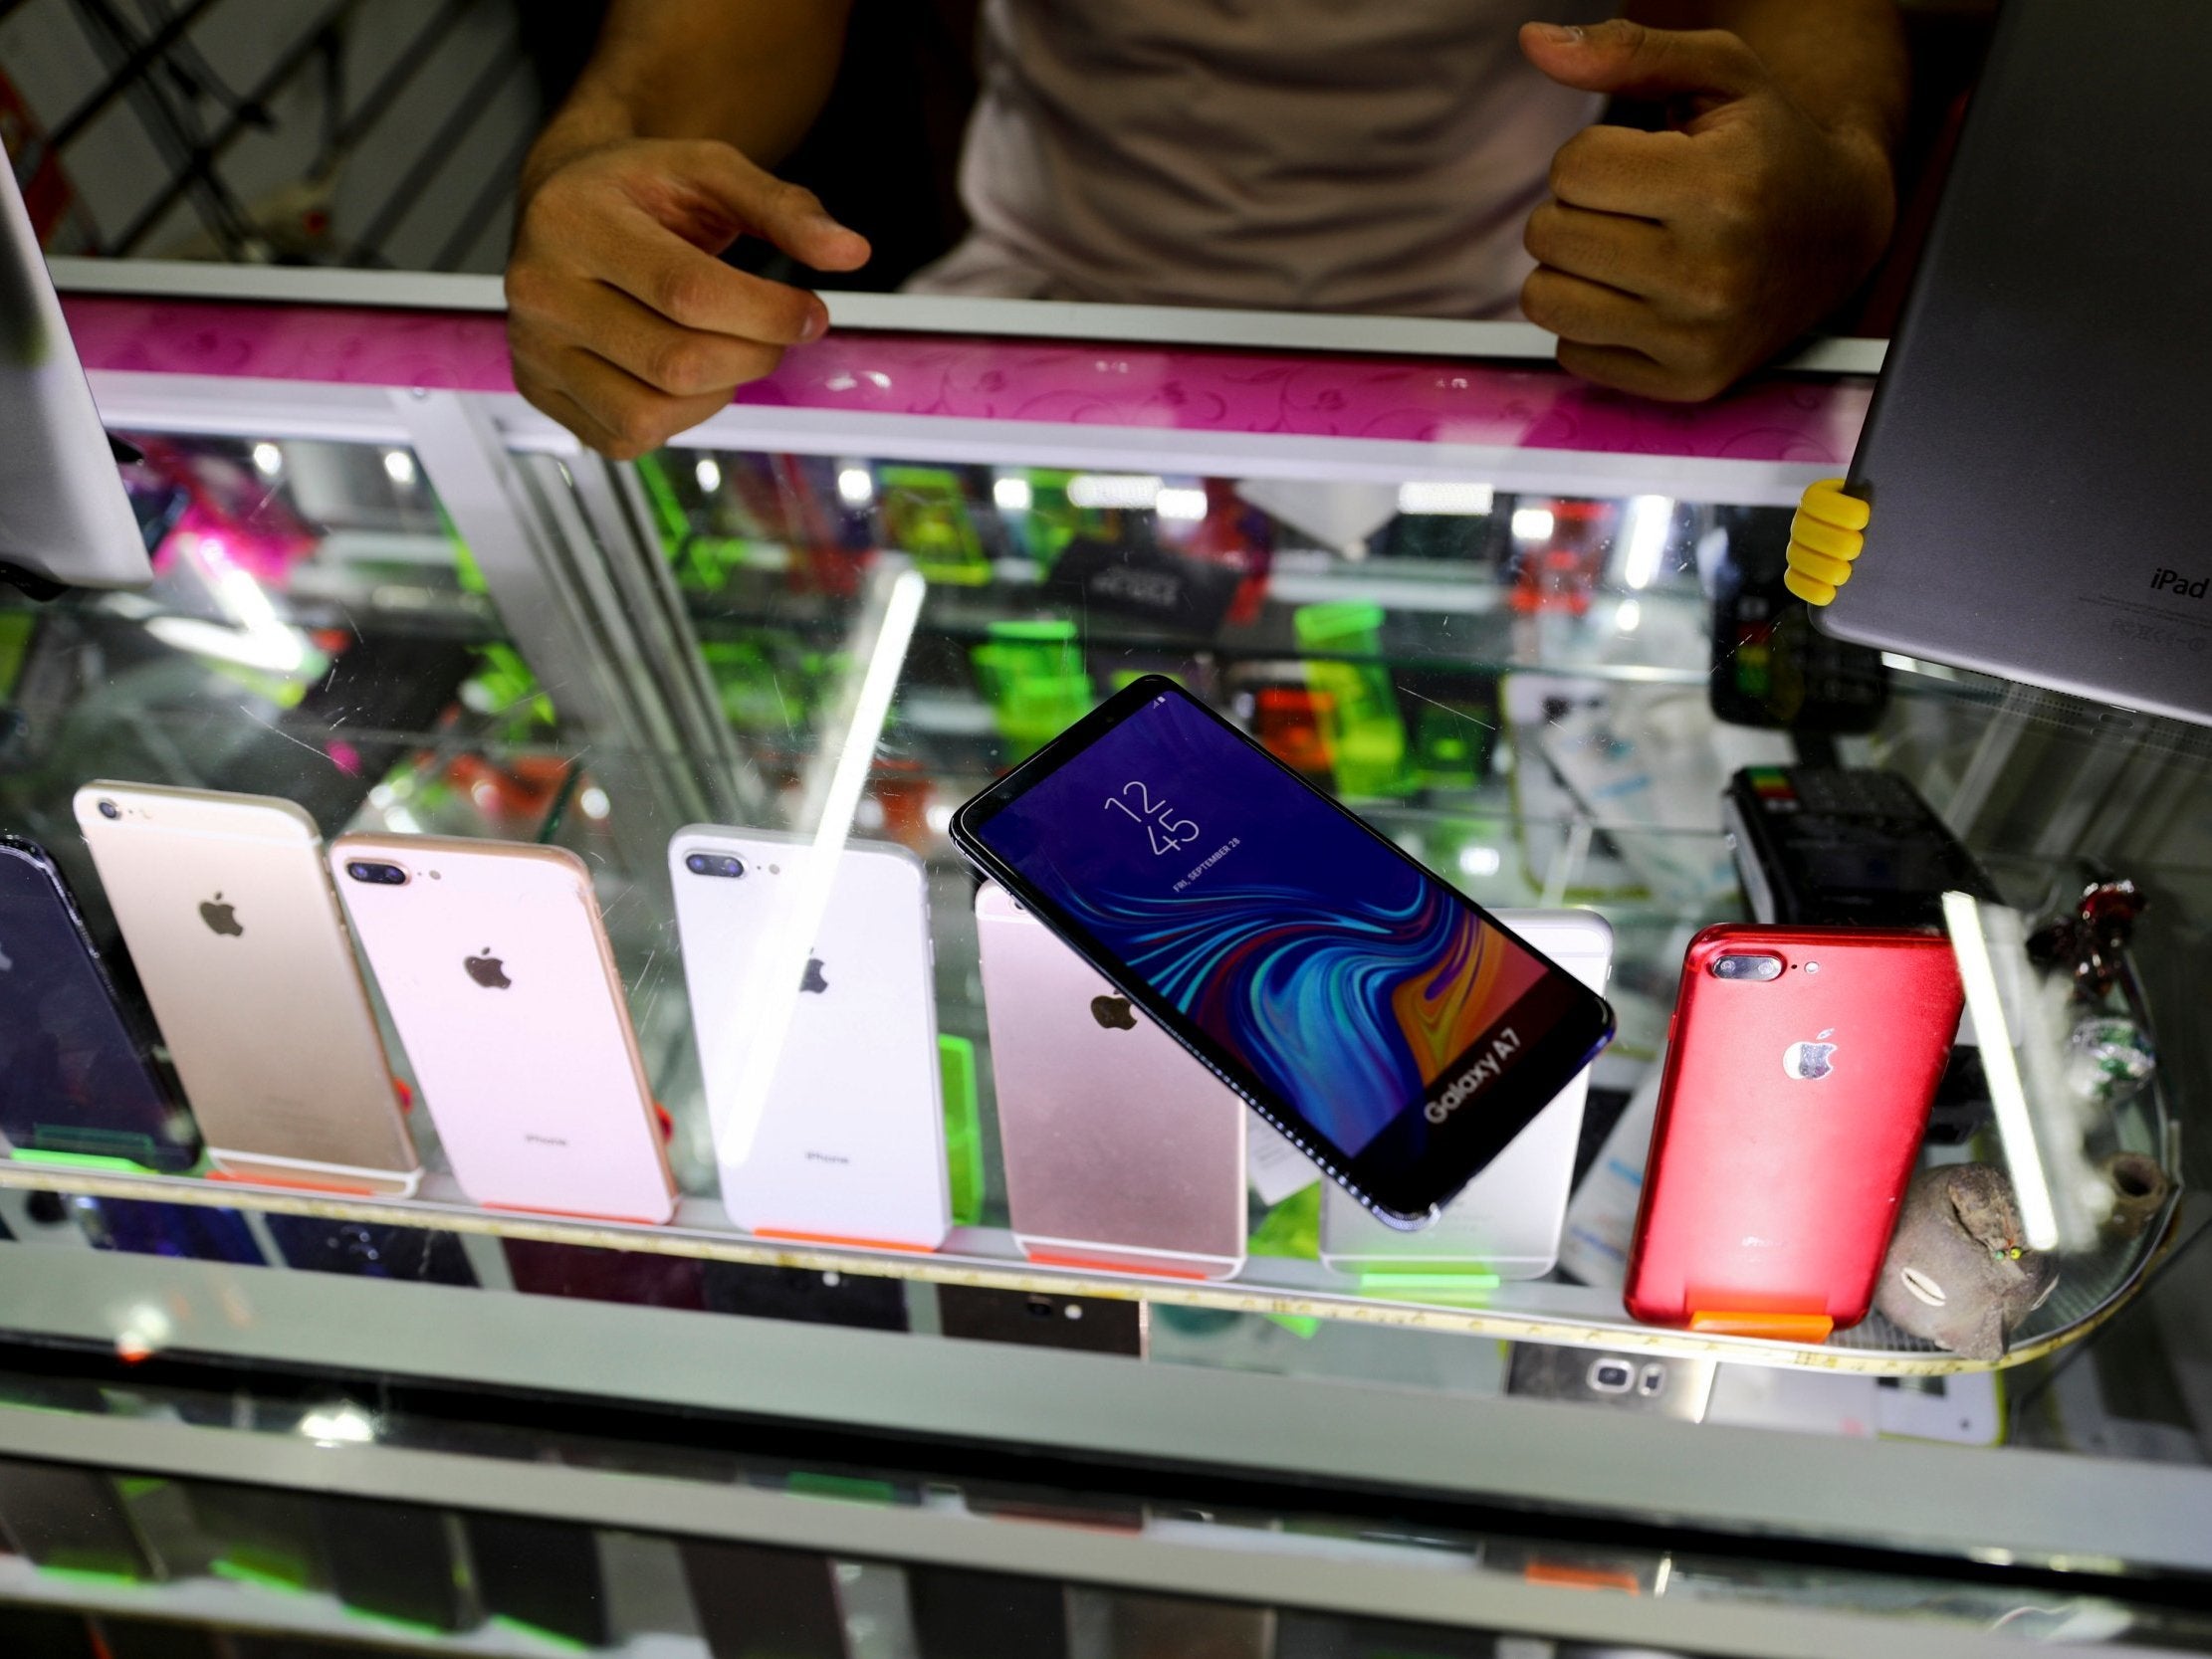 Mexicans buy fake phones to hand over in muggings as armed robberies soar